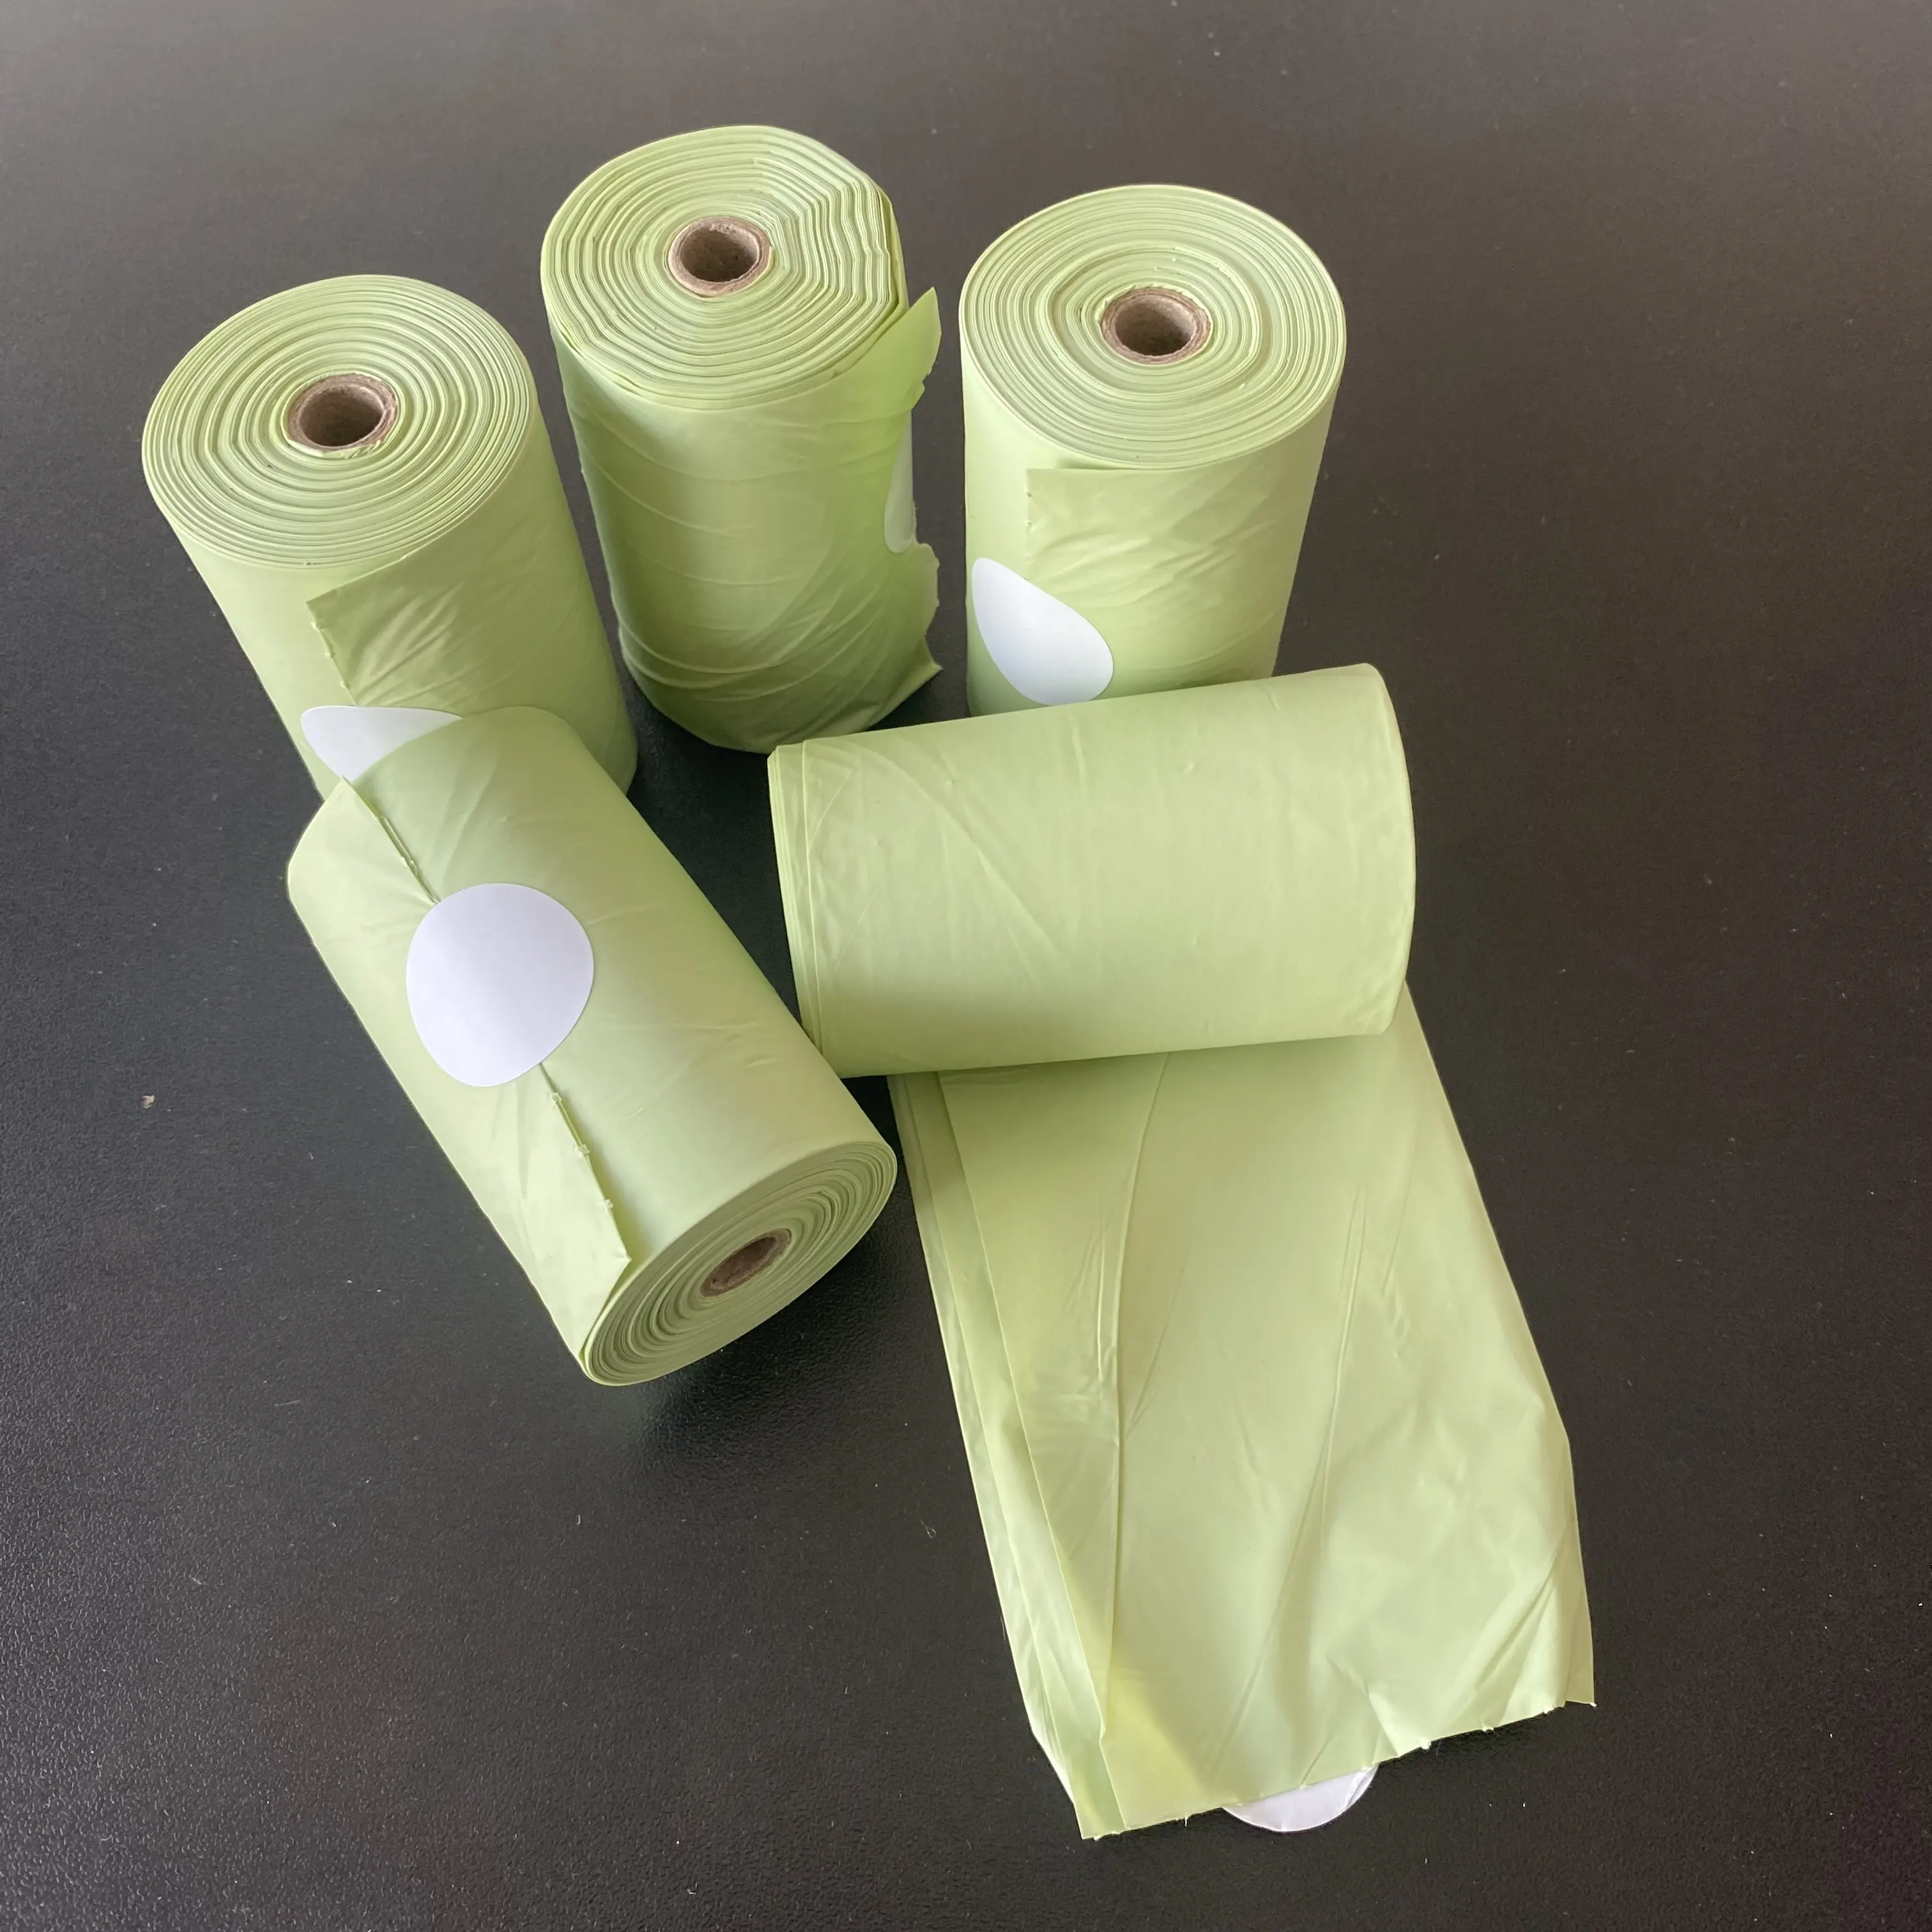 Wholesale Price OEM Service Pet Products HDPE Sustainable Compostable Dog Poop Bag Made in Vietnam